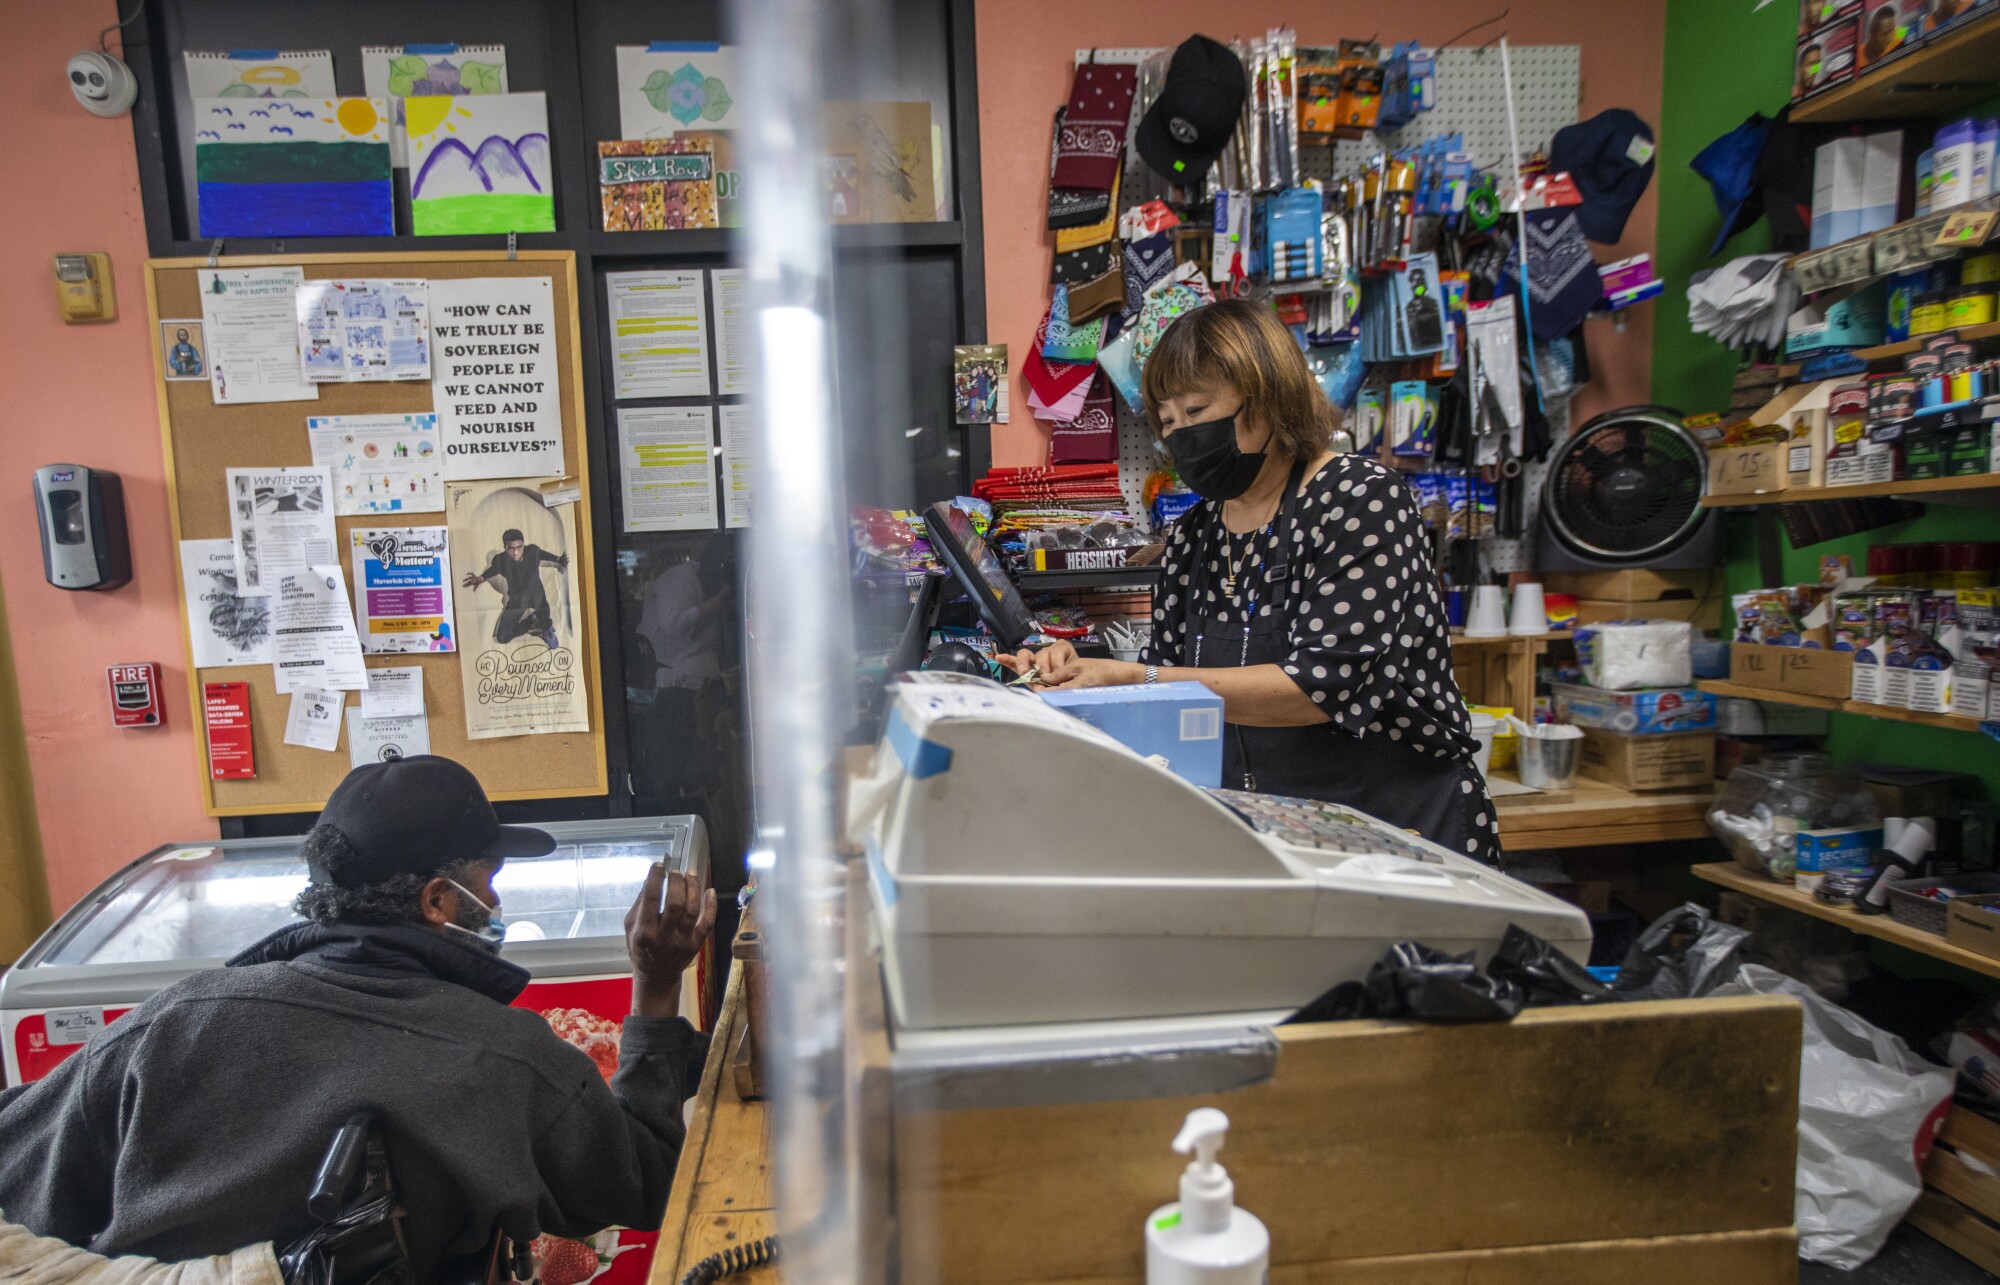 May Park, 67, speaks with a customer in a wheelchair as she works at Skid Row People's Market. 